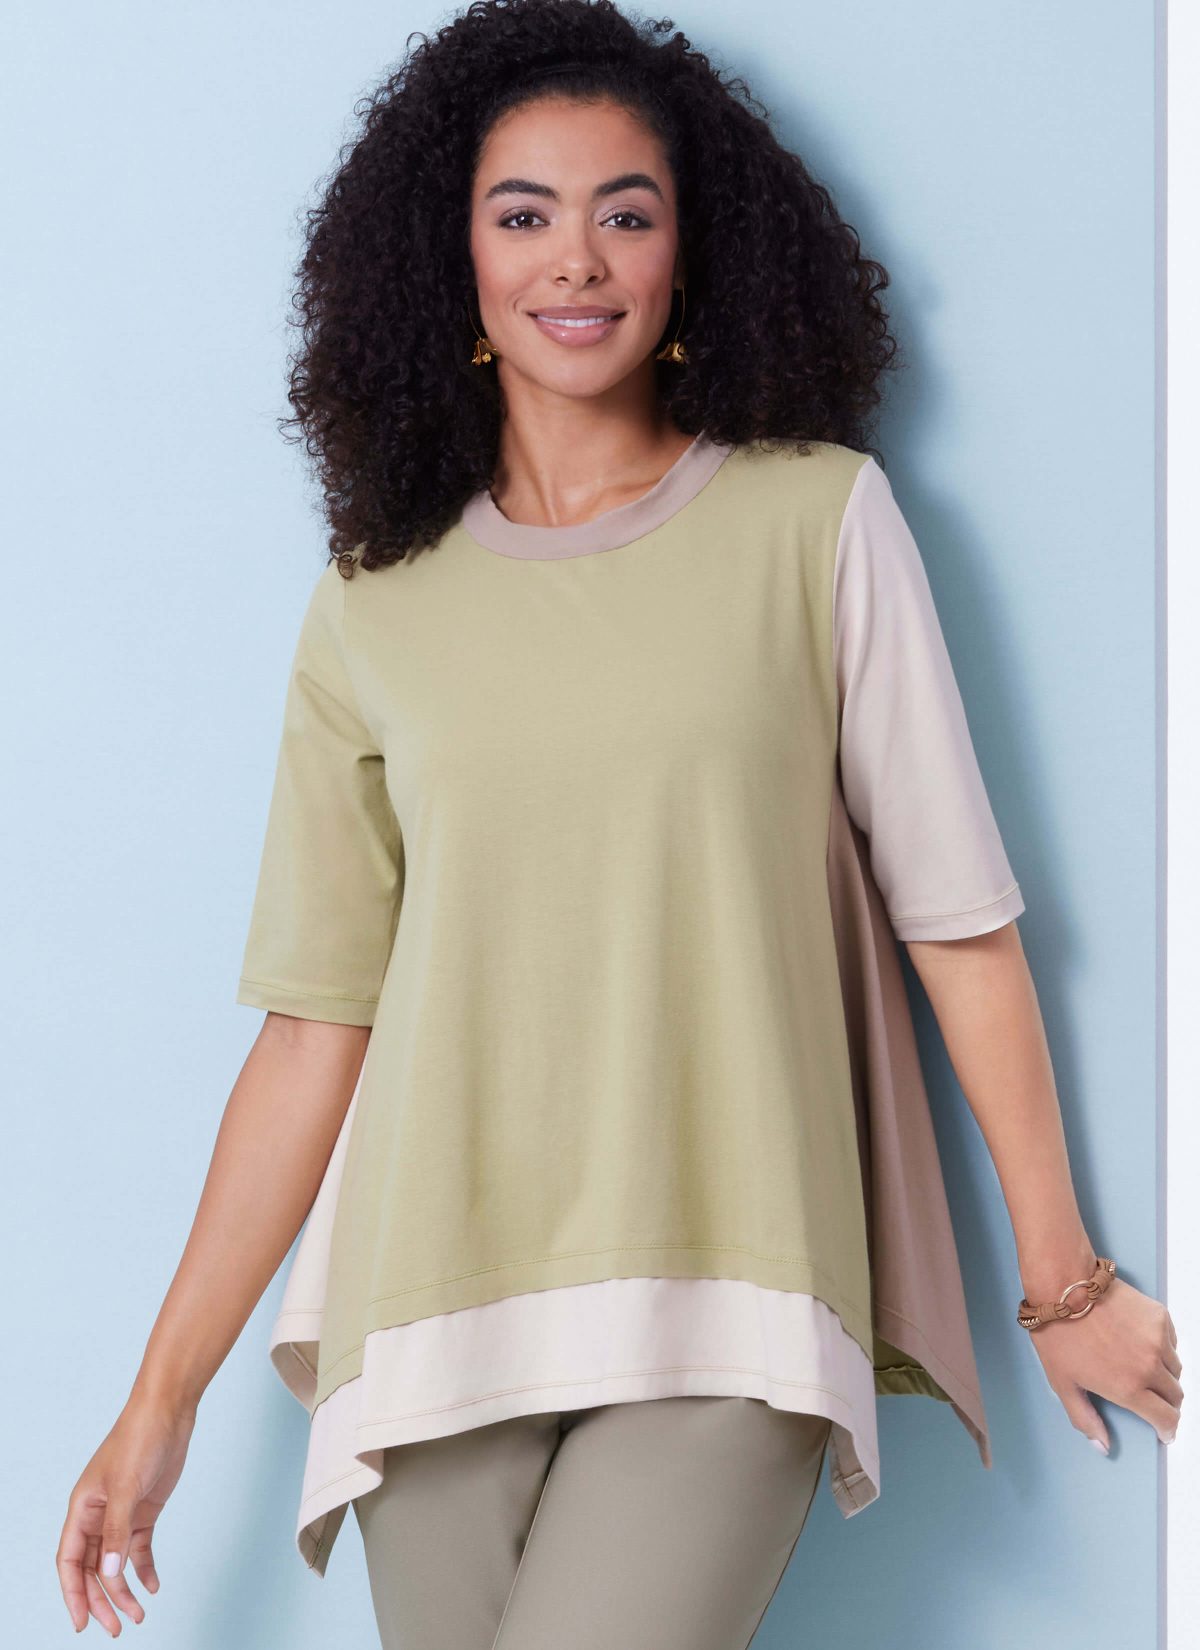 Butterick Sewing Pattern B6981 Misses' Tops by Katherine Tilton